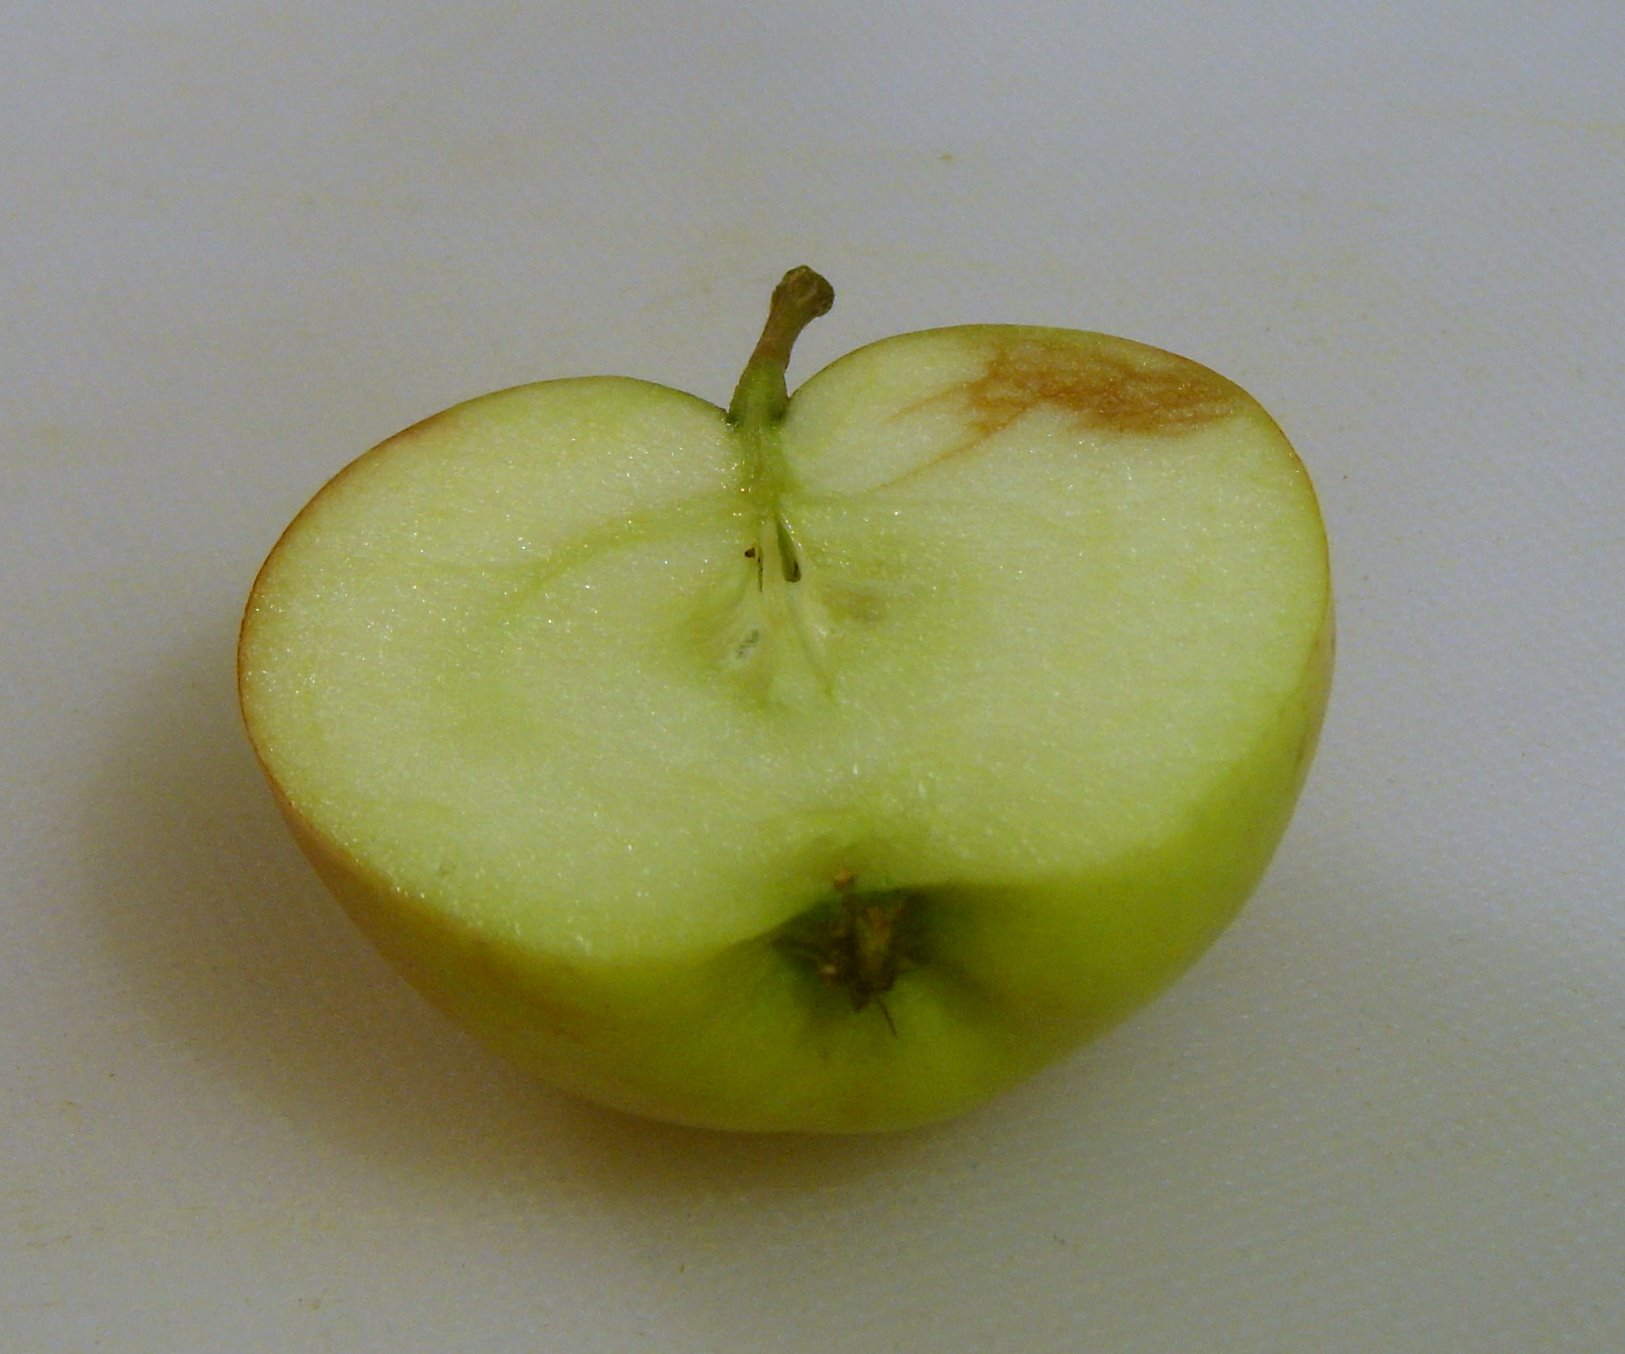 a green apple sliced into pieces sitting on a table